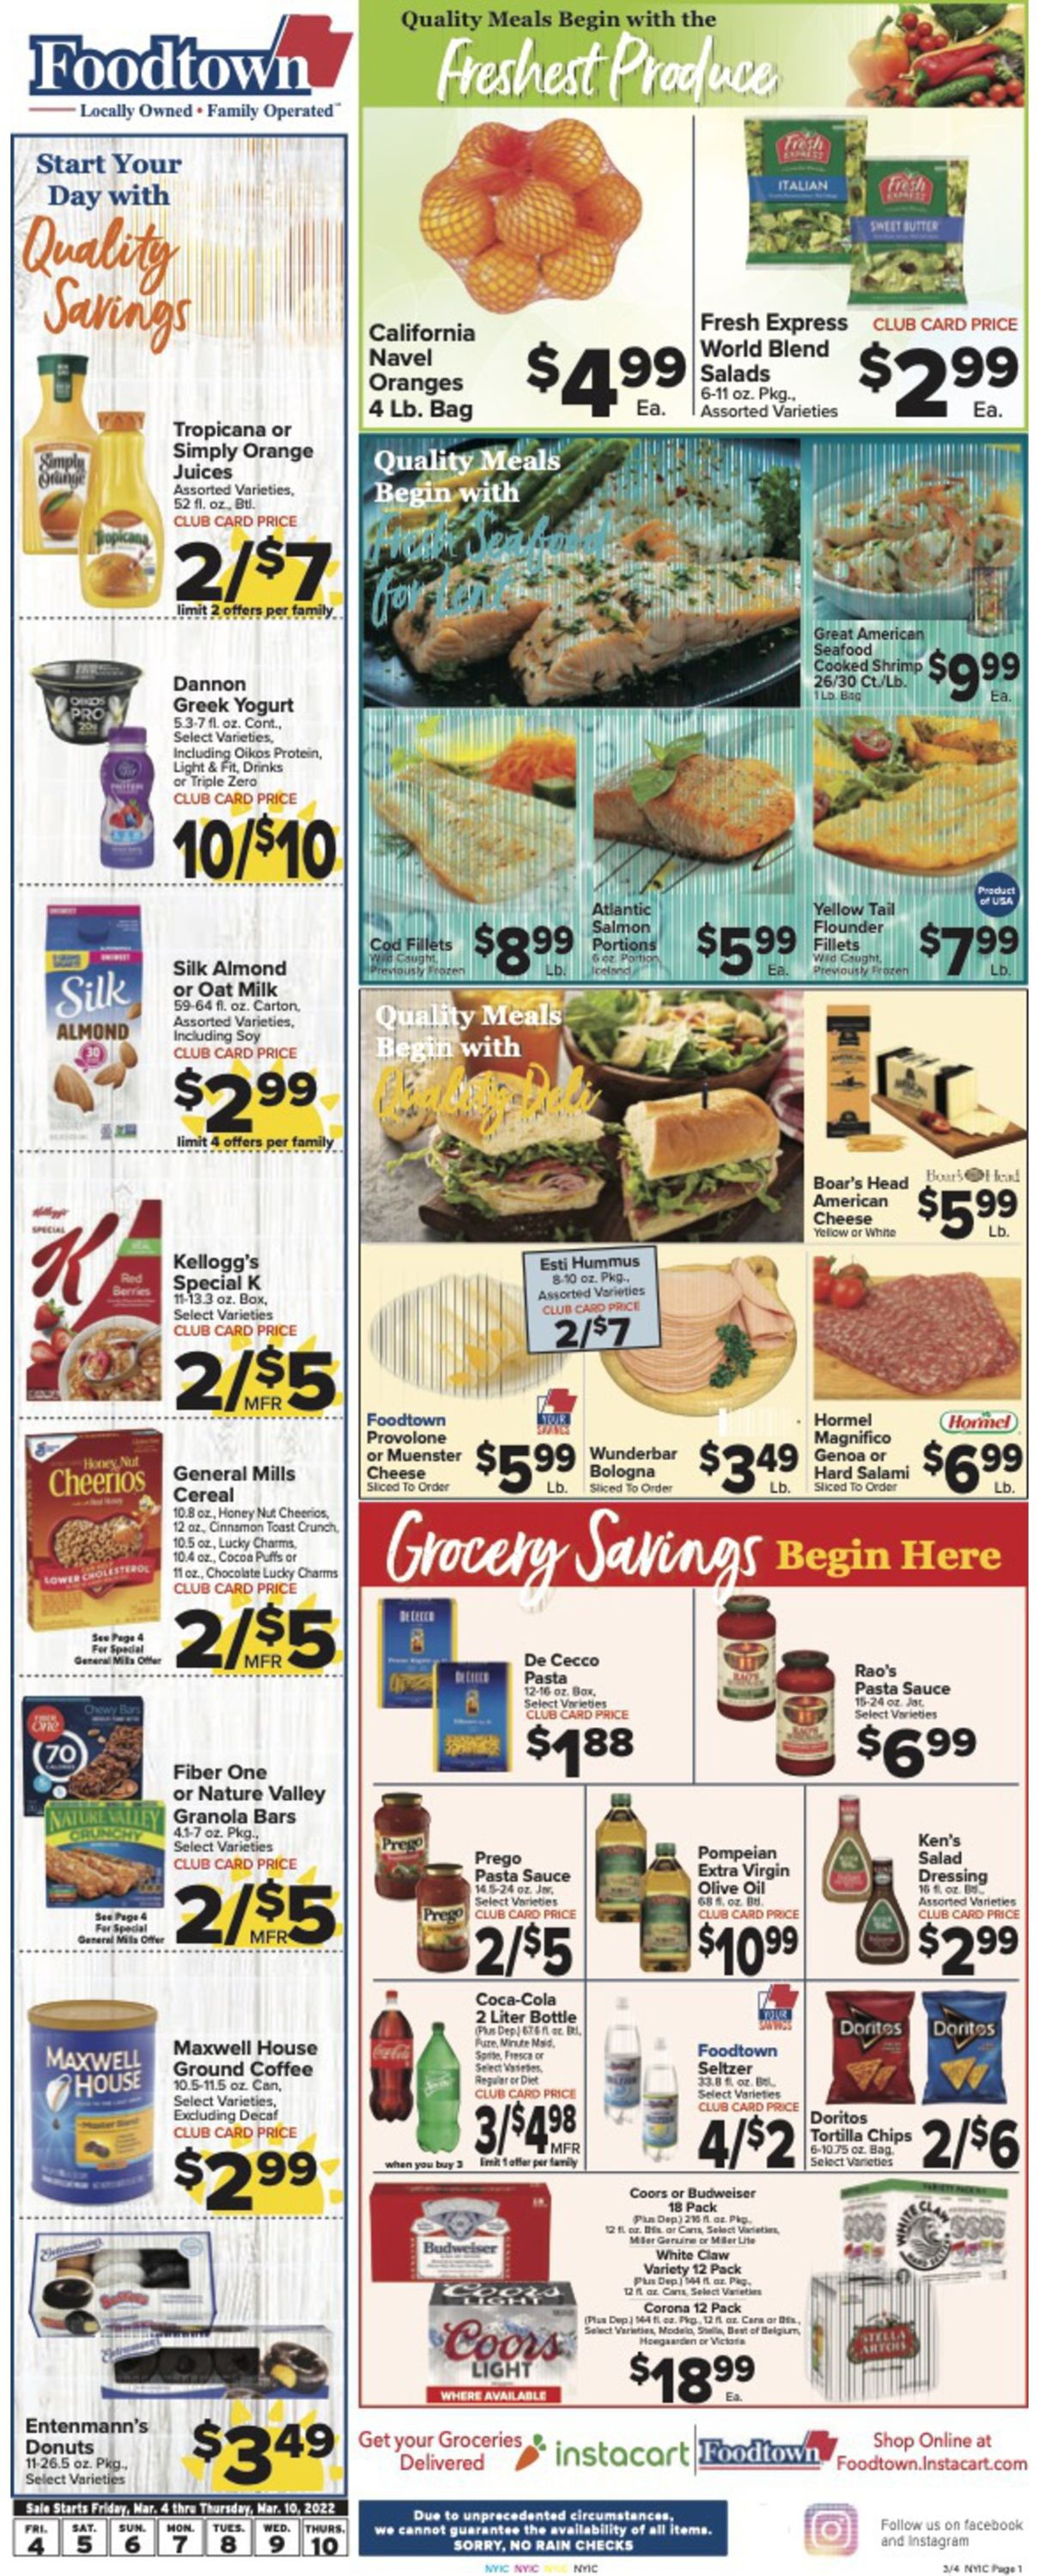 Foodtown Ad from 03/04/2022